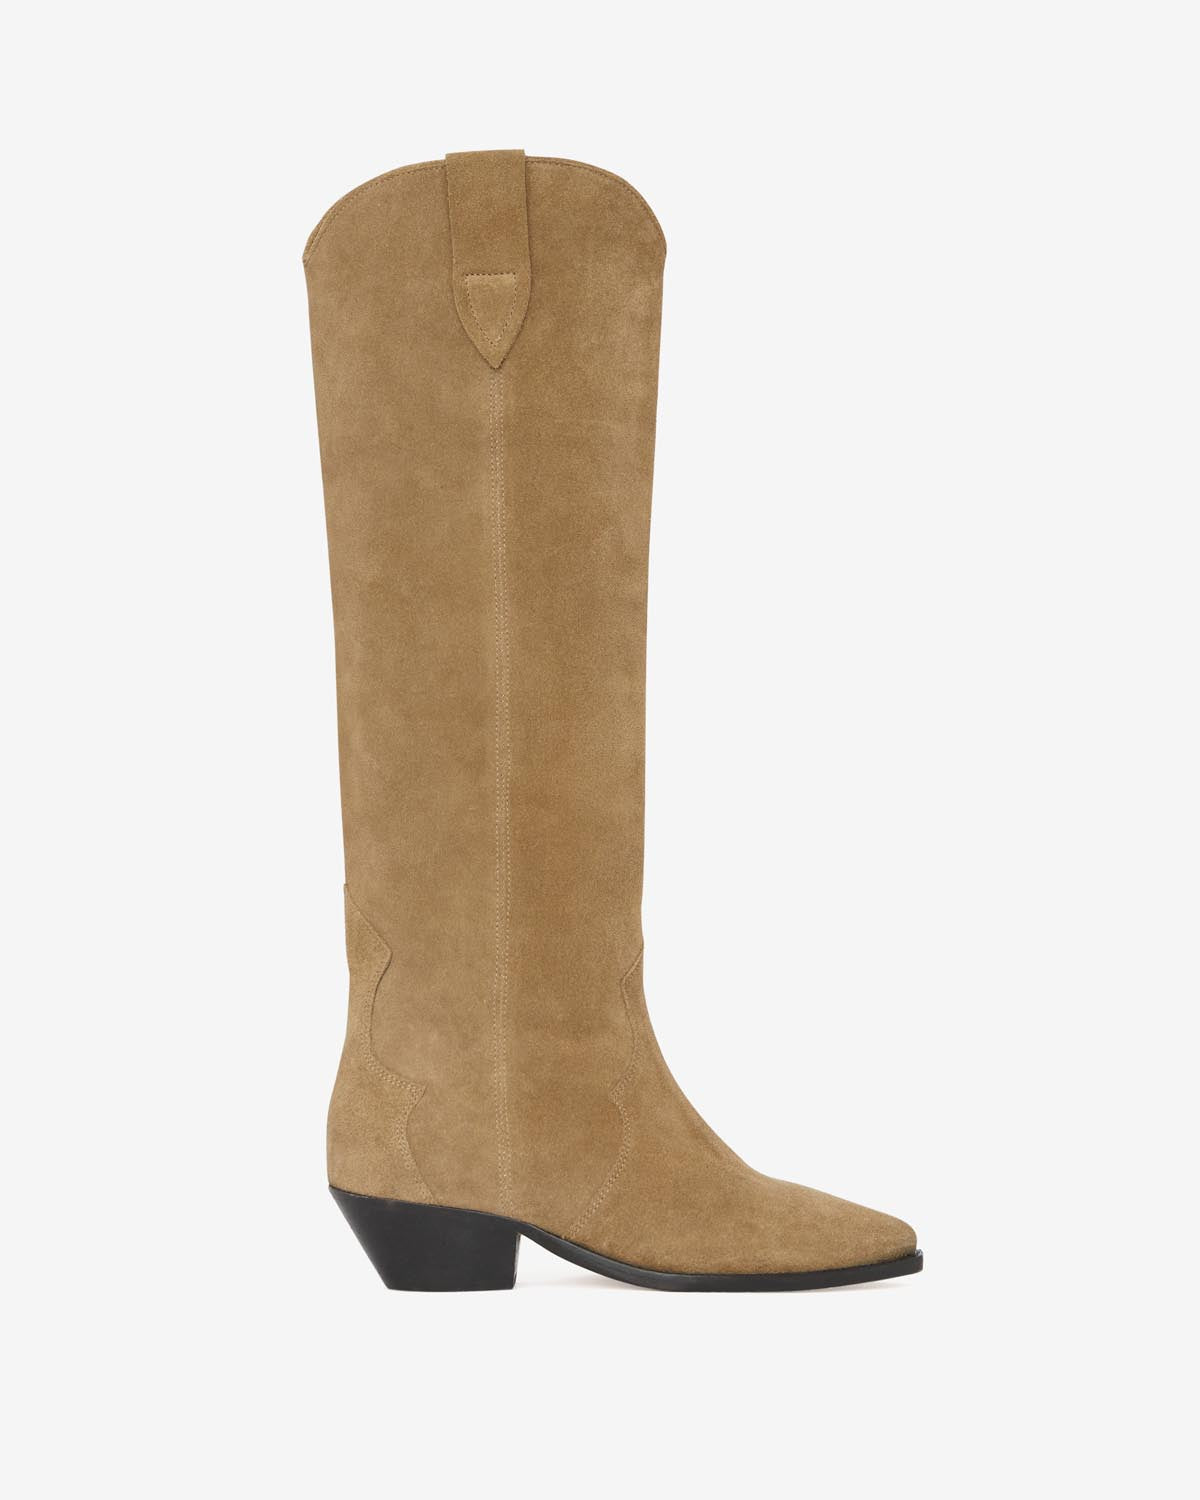 Denvee Boots Woman taupe | ISABEL MARANT Official online store